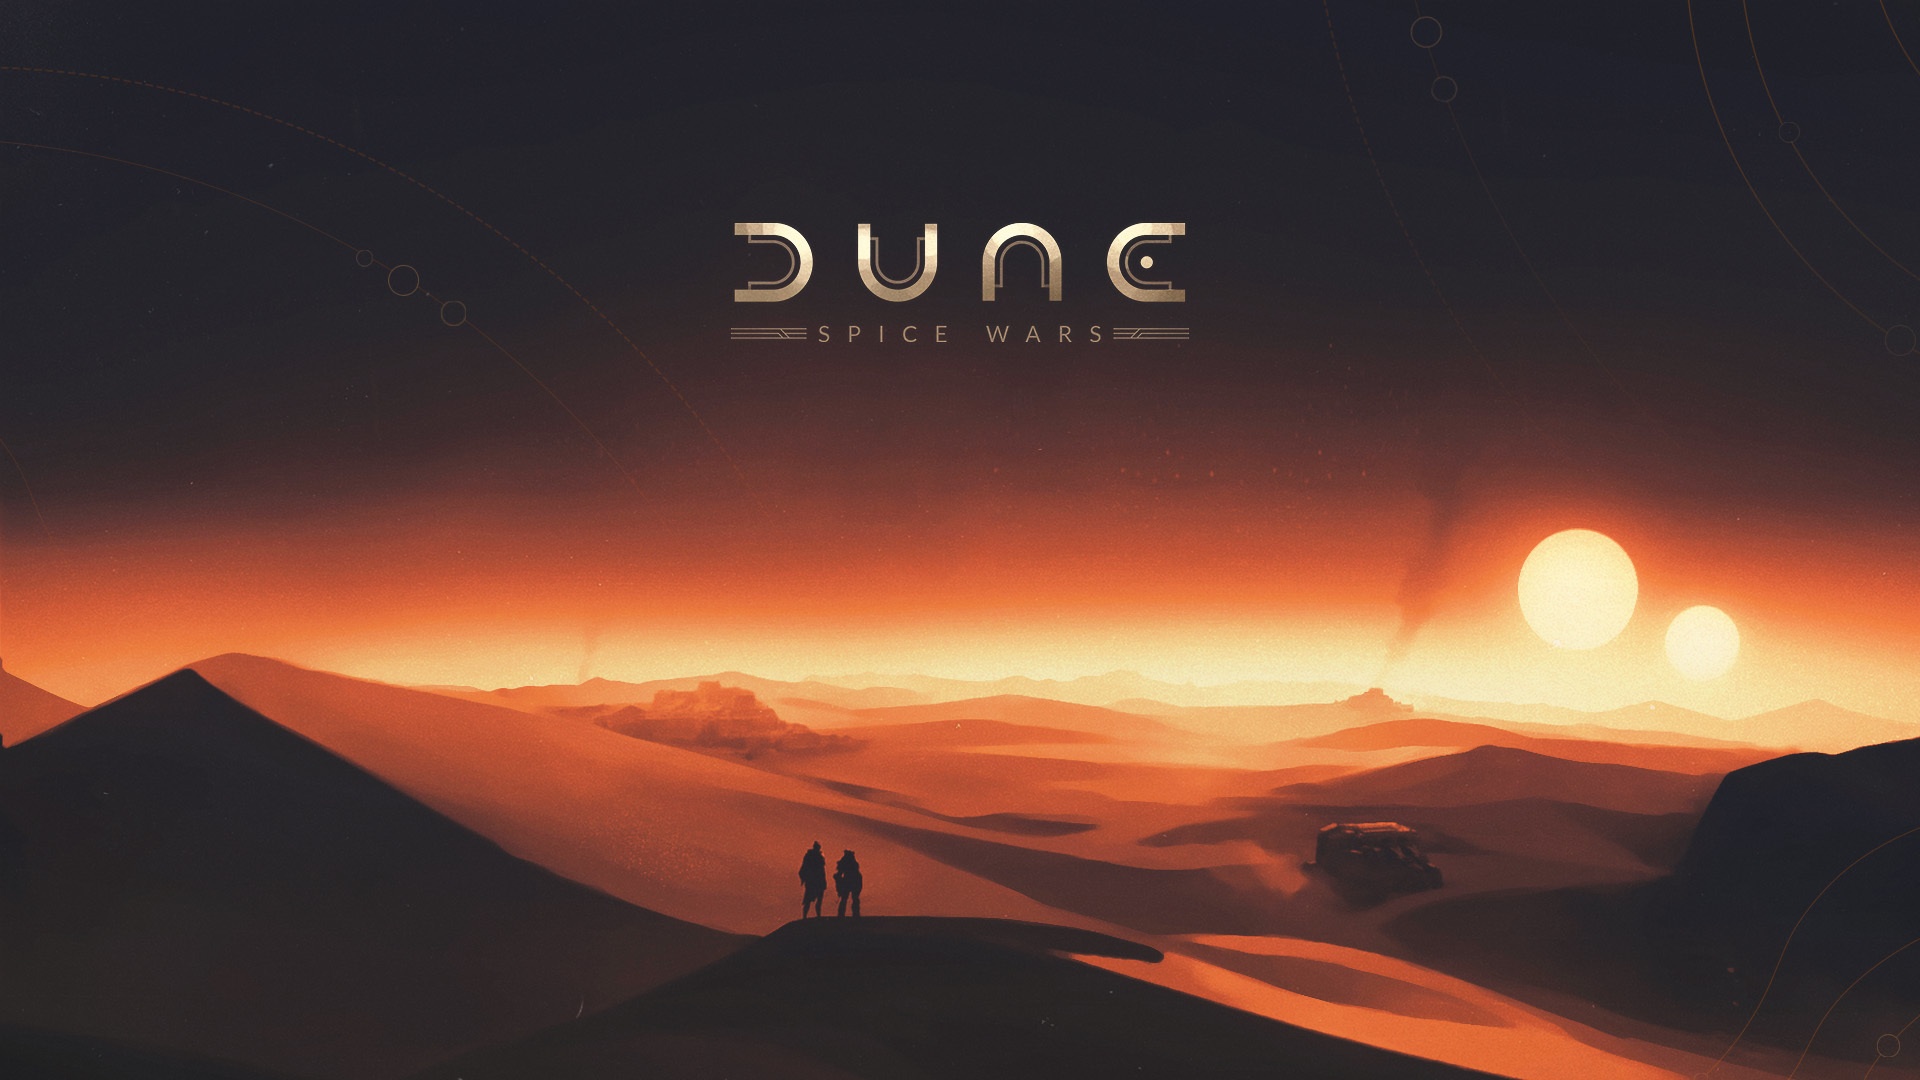 Dune: Spice Wars Exits Early Access on September 14th